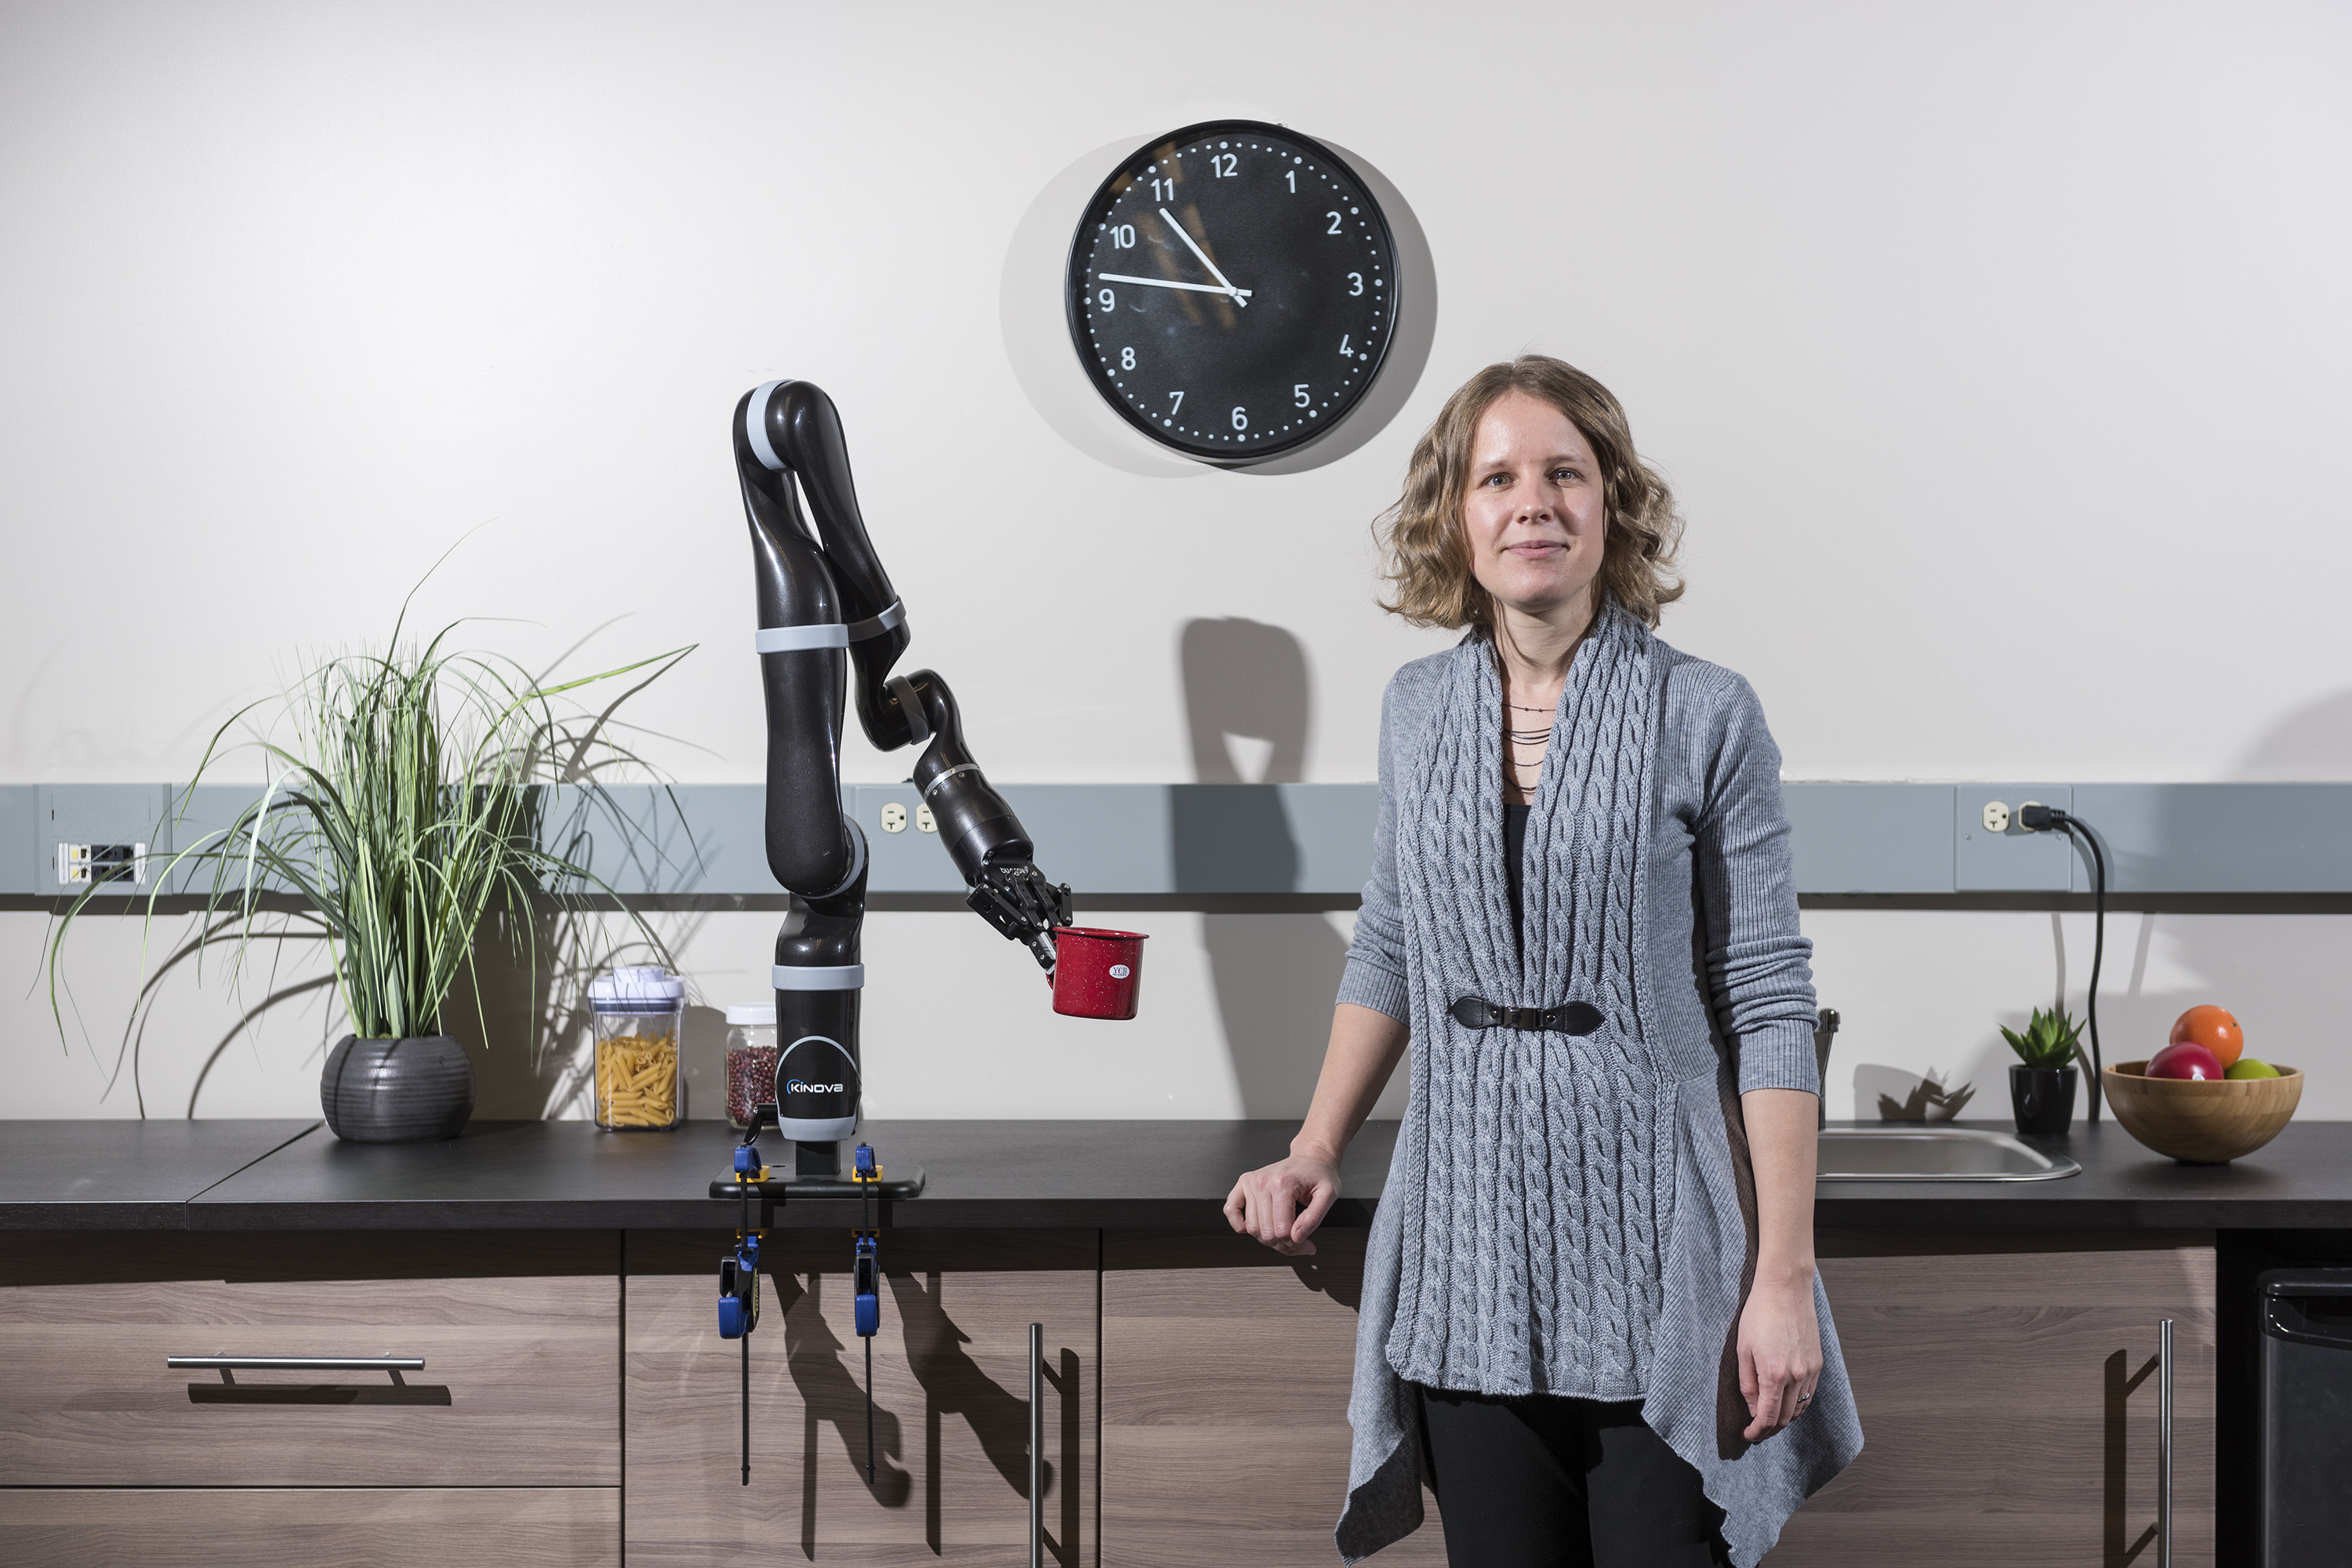 Sonia Chernova, an assistant professor in the School of Interactive Computing, is part of a research group working on a new Army Research Laboratory grant aimed at developing resilient robot teams. (Credit: Rob Felt, Georgia Tech)